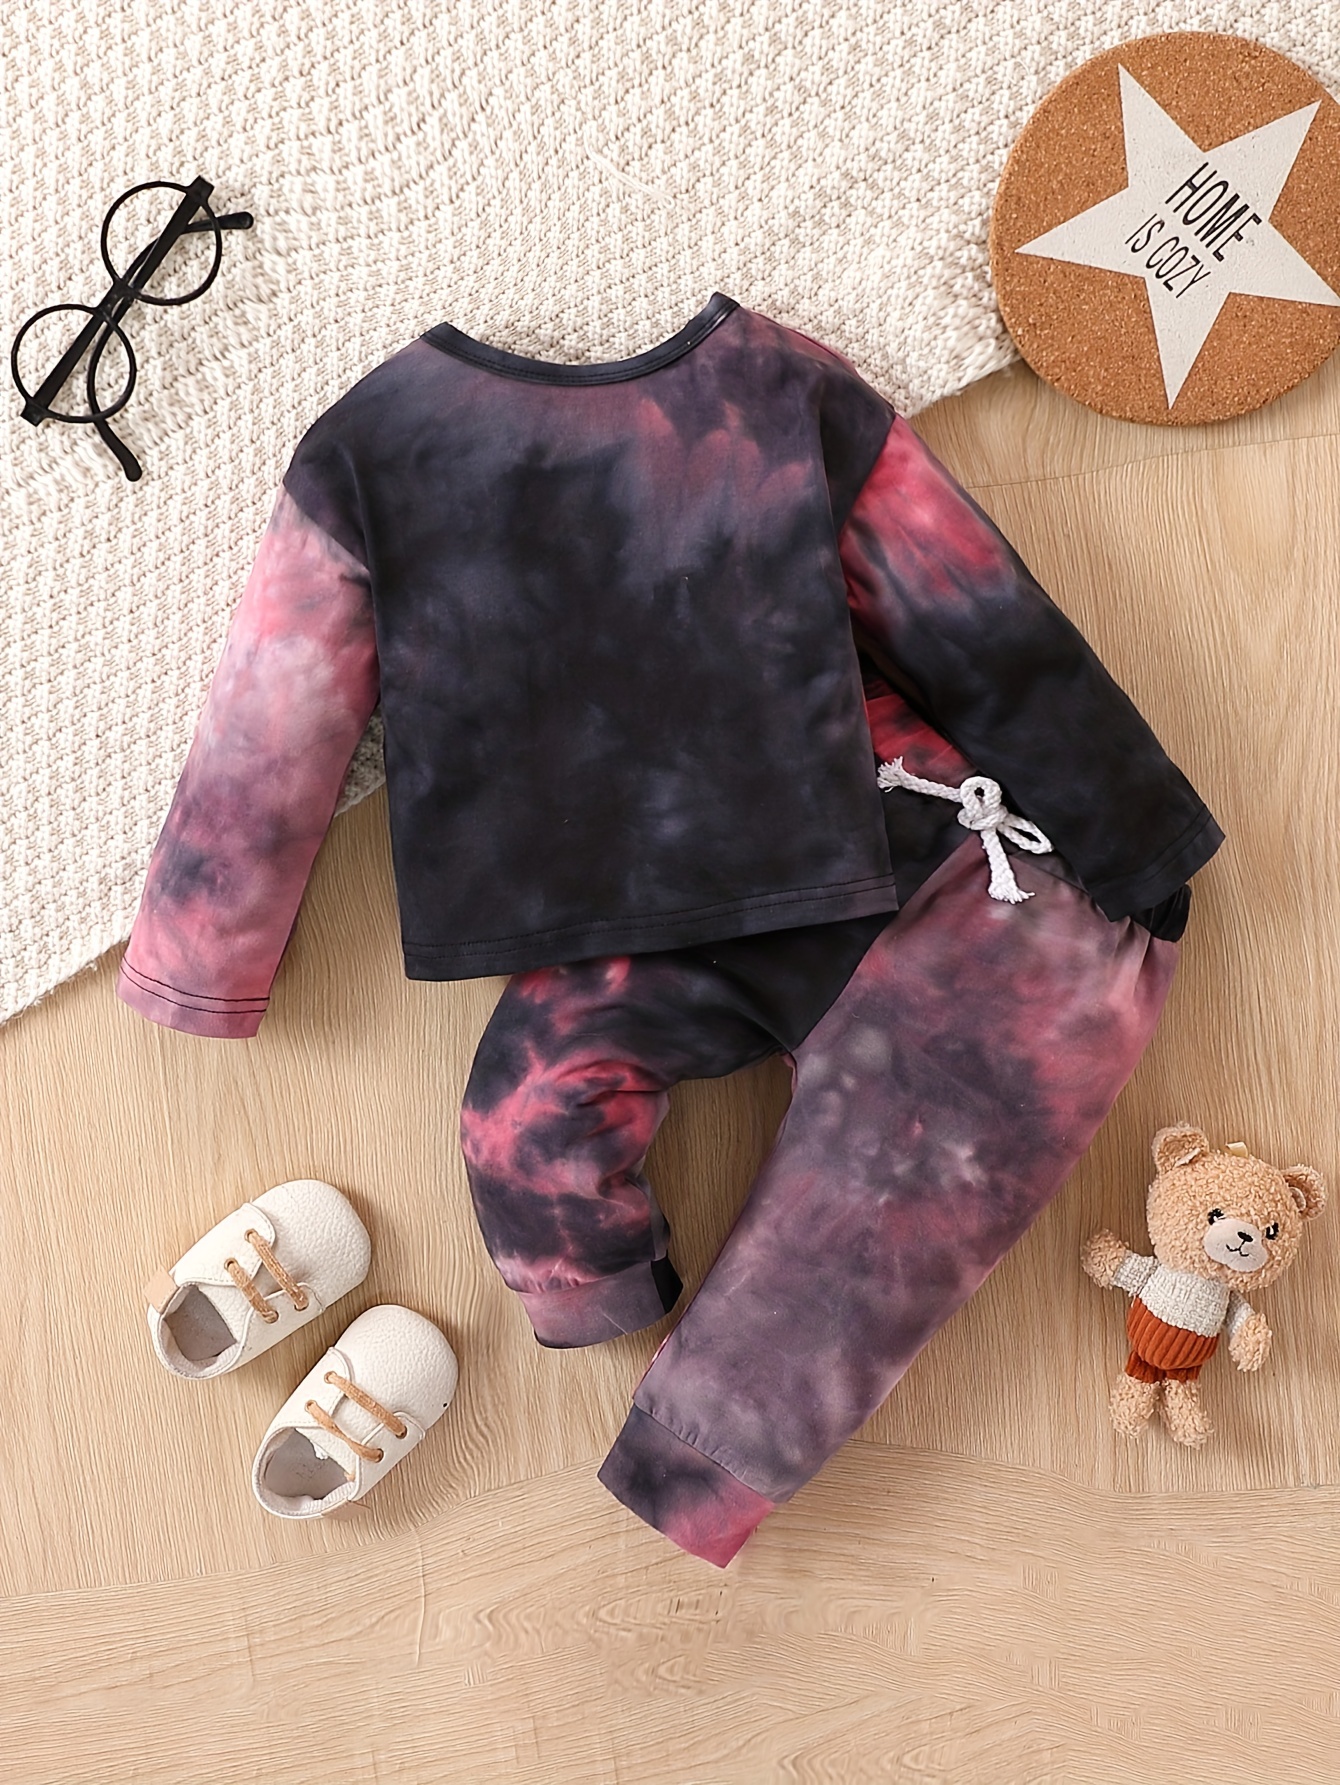 AURIGATE Toddler Baby Kids Girls Boys Tie-dye Set T-shirt Tops Pants Casual  Outfits Clearance 